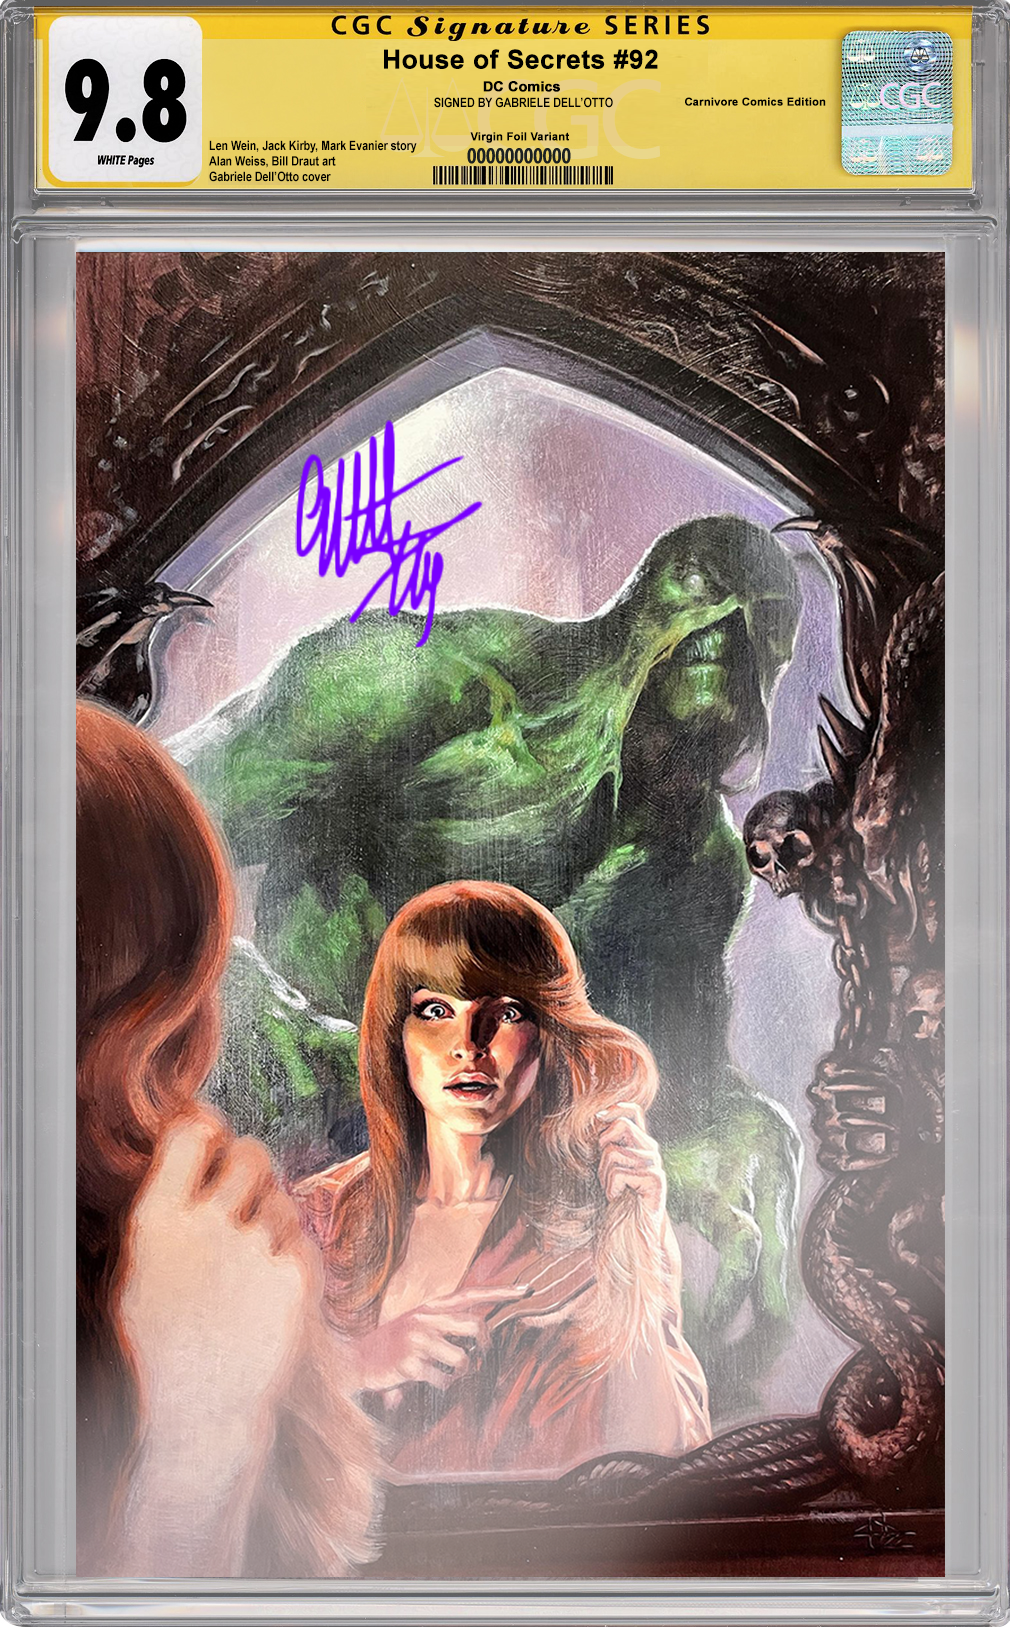 House of Secrets #92 - CGC 9.6-9.8 SS Virgin Foil Variant - Gabriele Dell'Otto